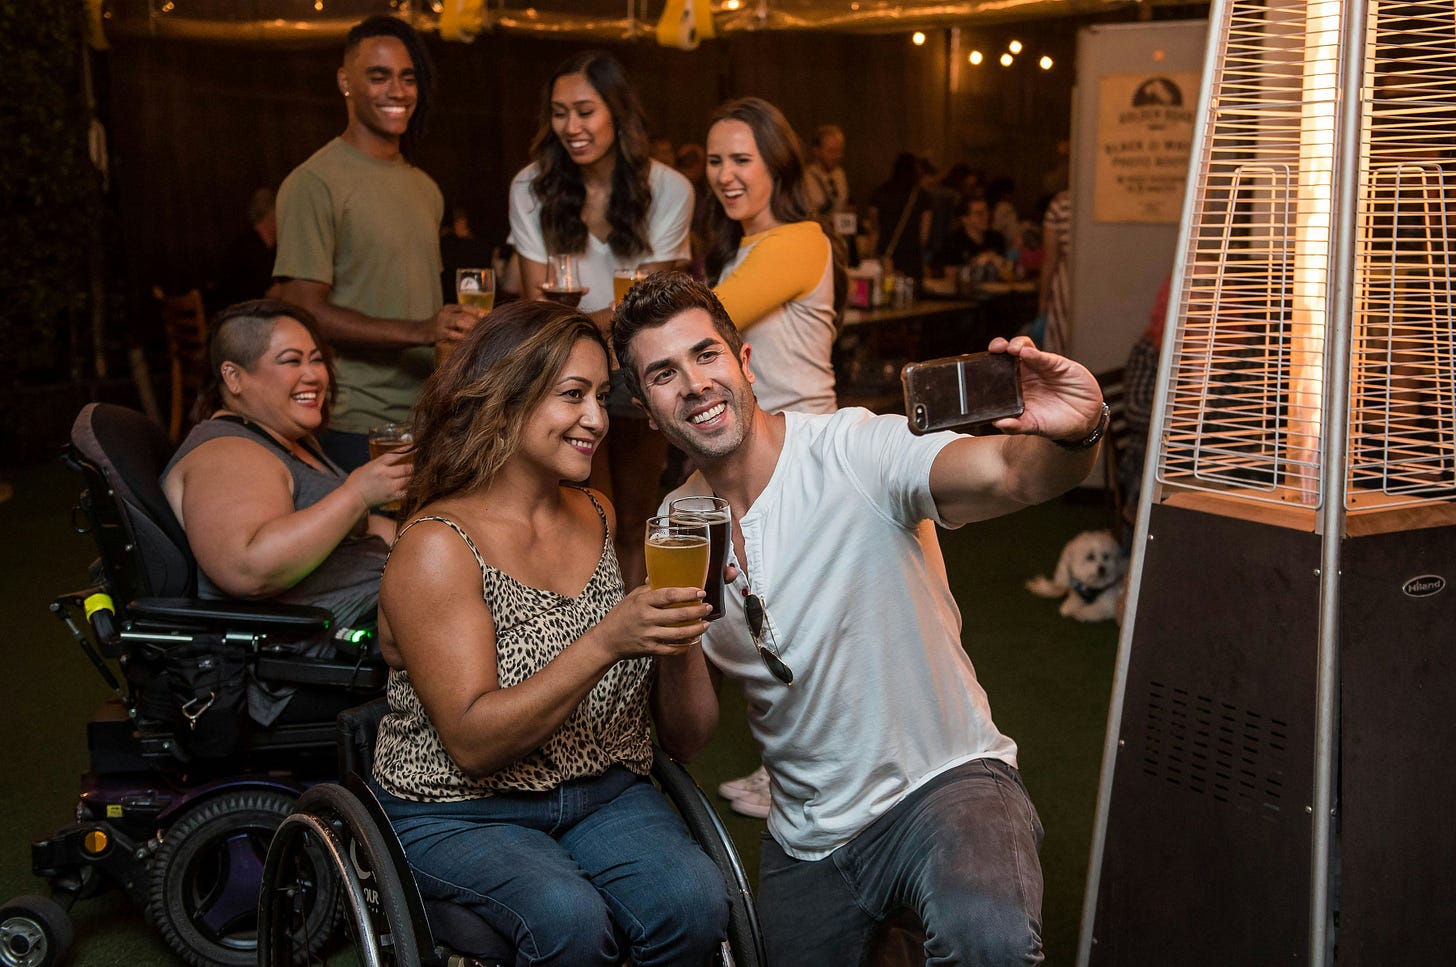 A white man in a wheelchair kneels down to take a selfie with a brown woman in a wheelchair as they clink drinks. Behind them, another woman in a wheelchair holding a drink laughs, and behind her, three non-visibly disabled people laugh too. 